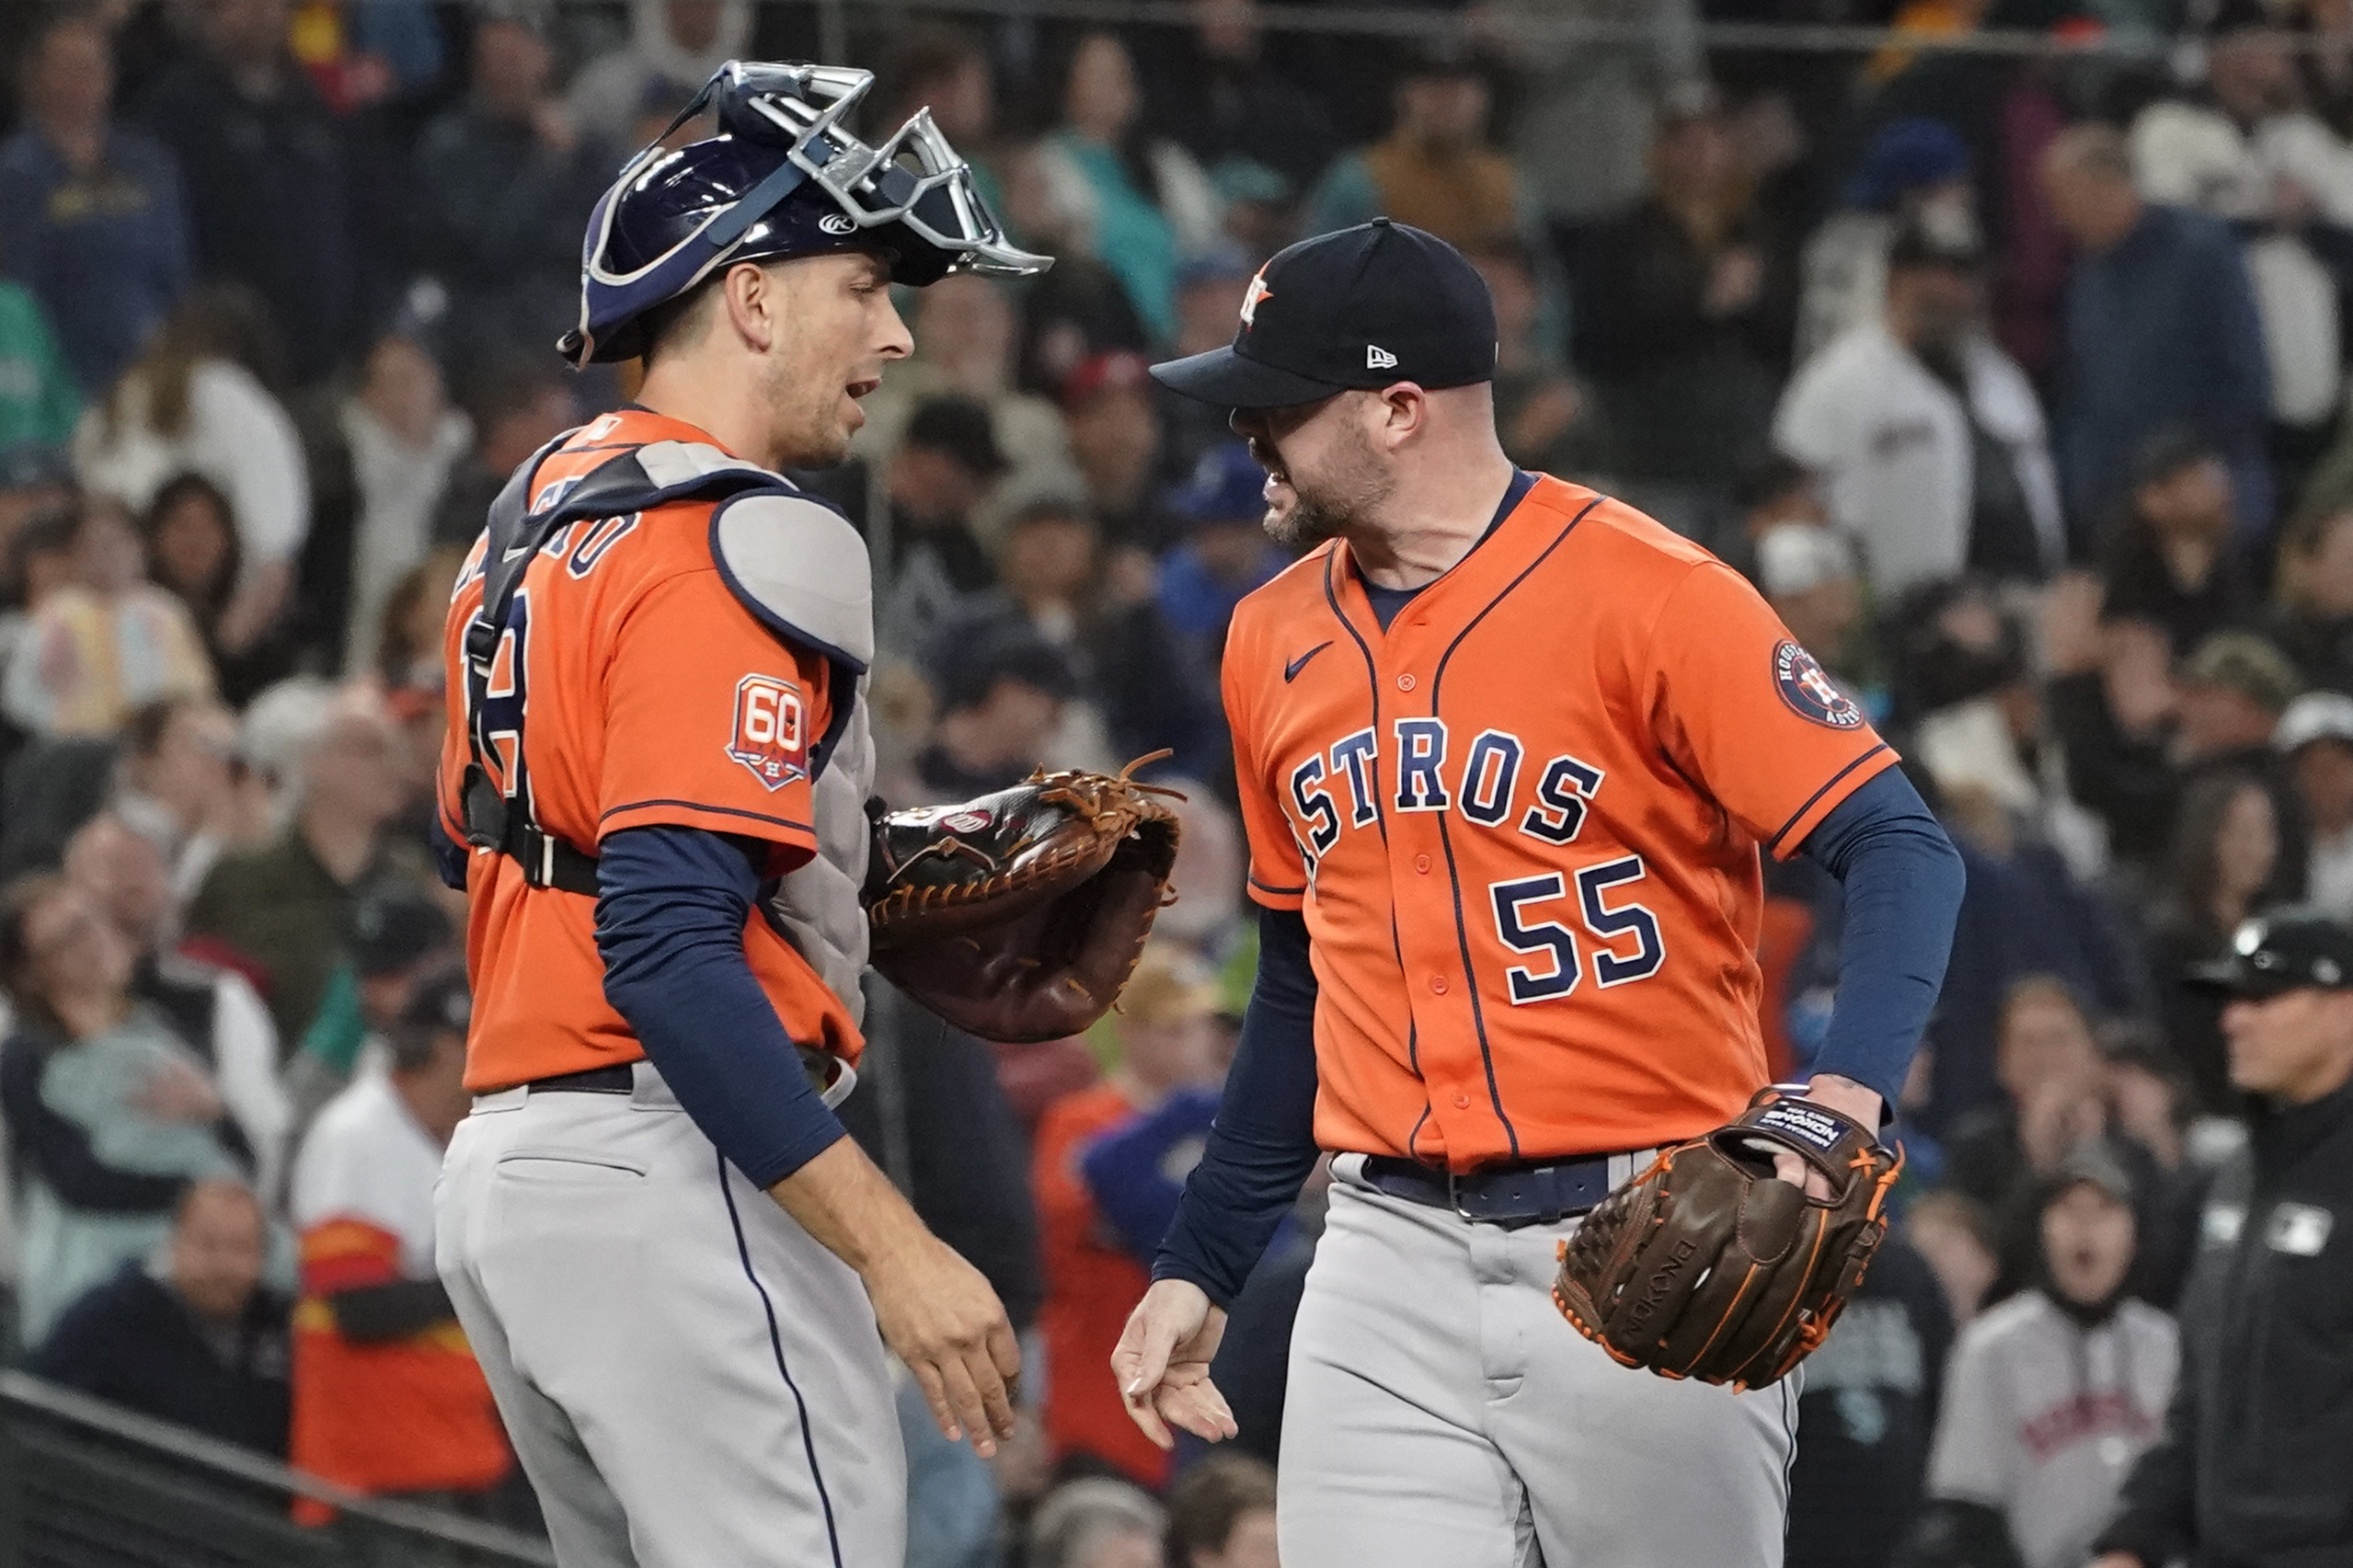 Mariners manager Scott Servais sounds off after sweep of Astros